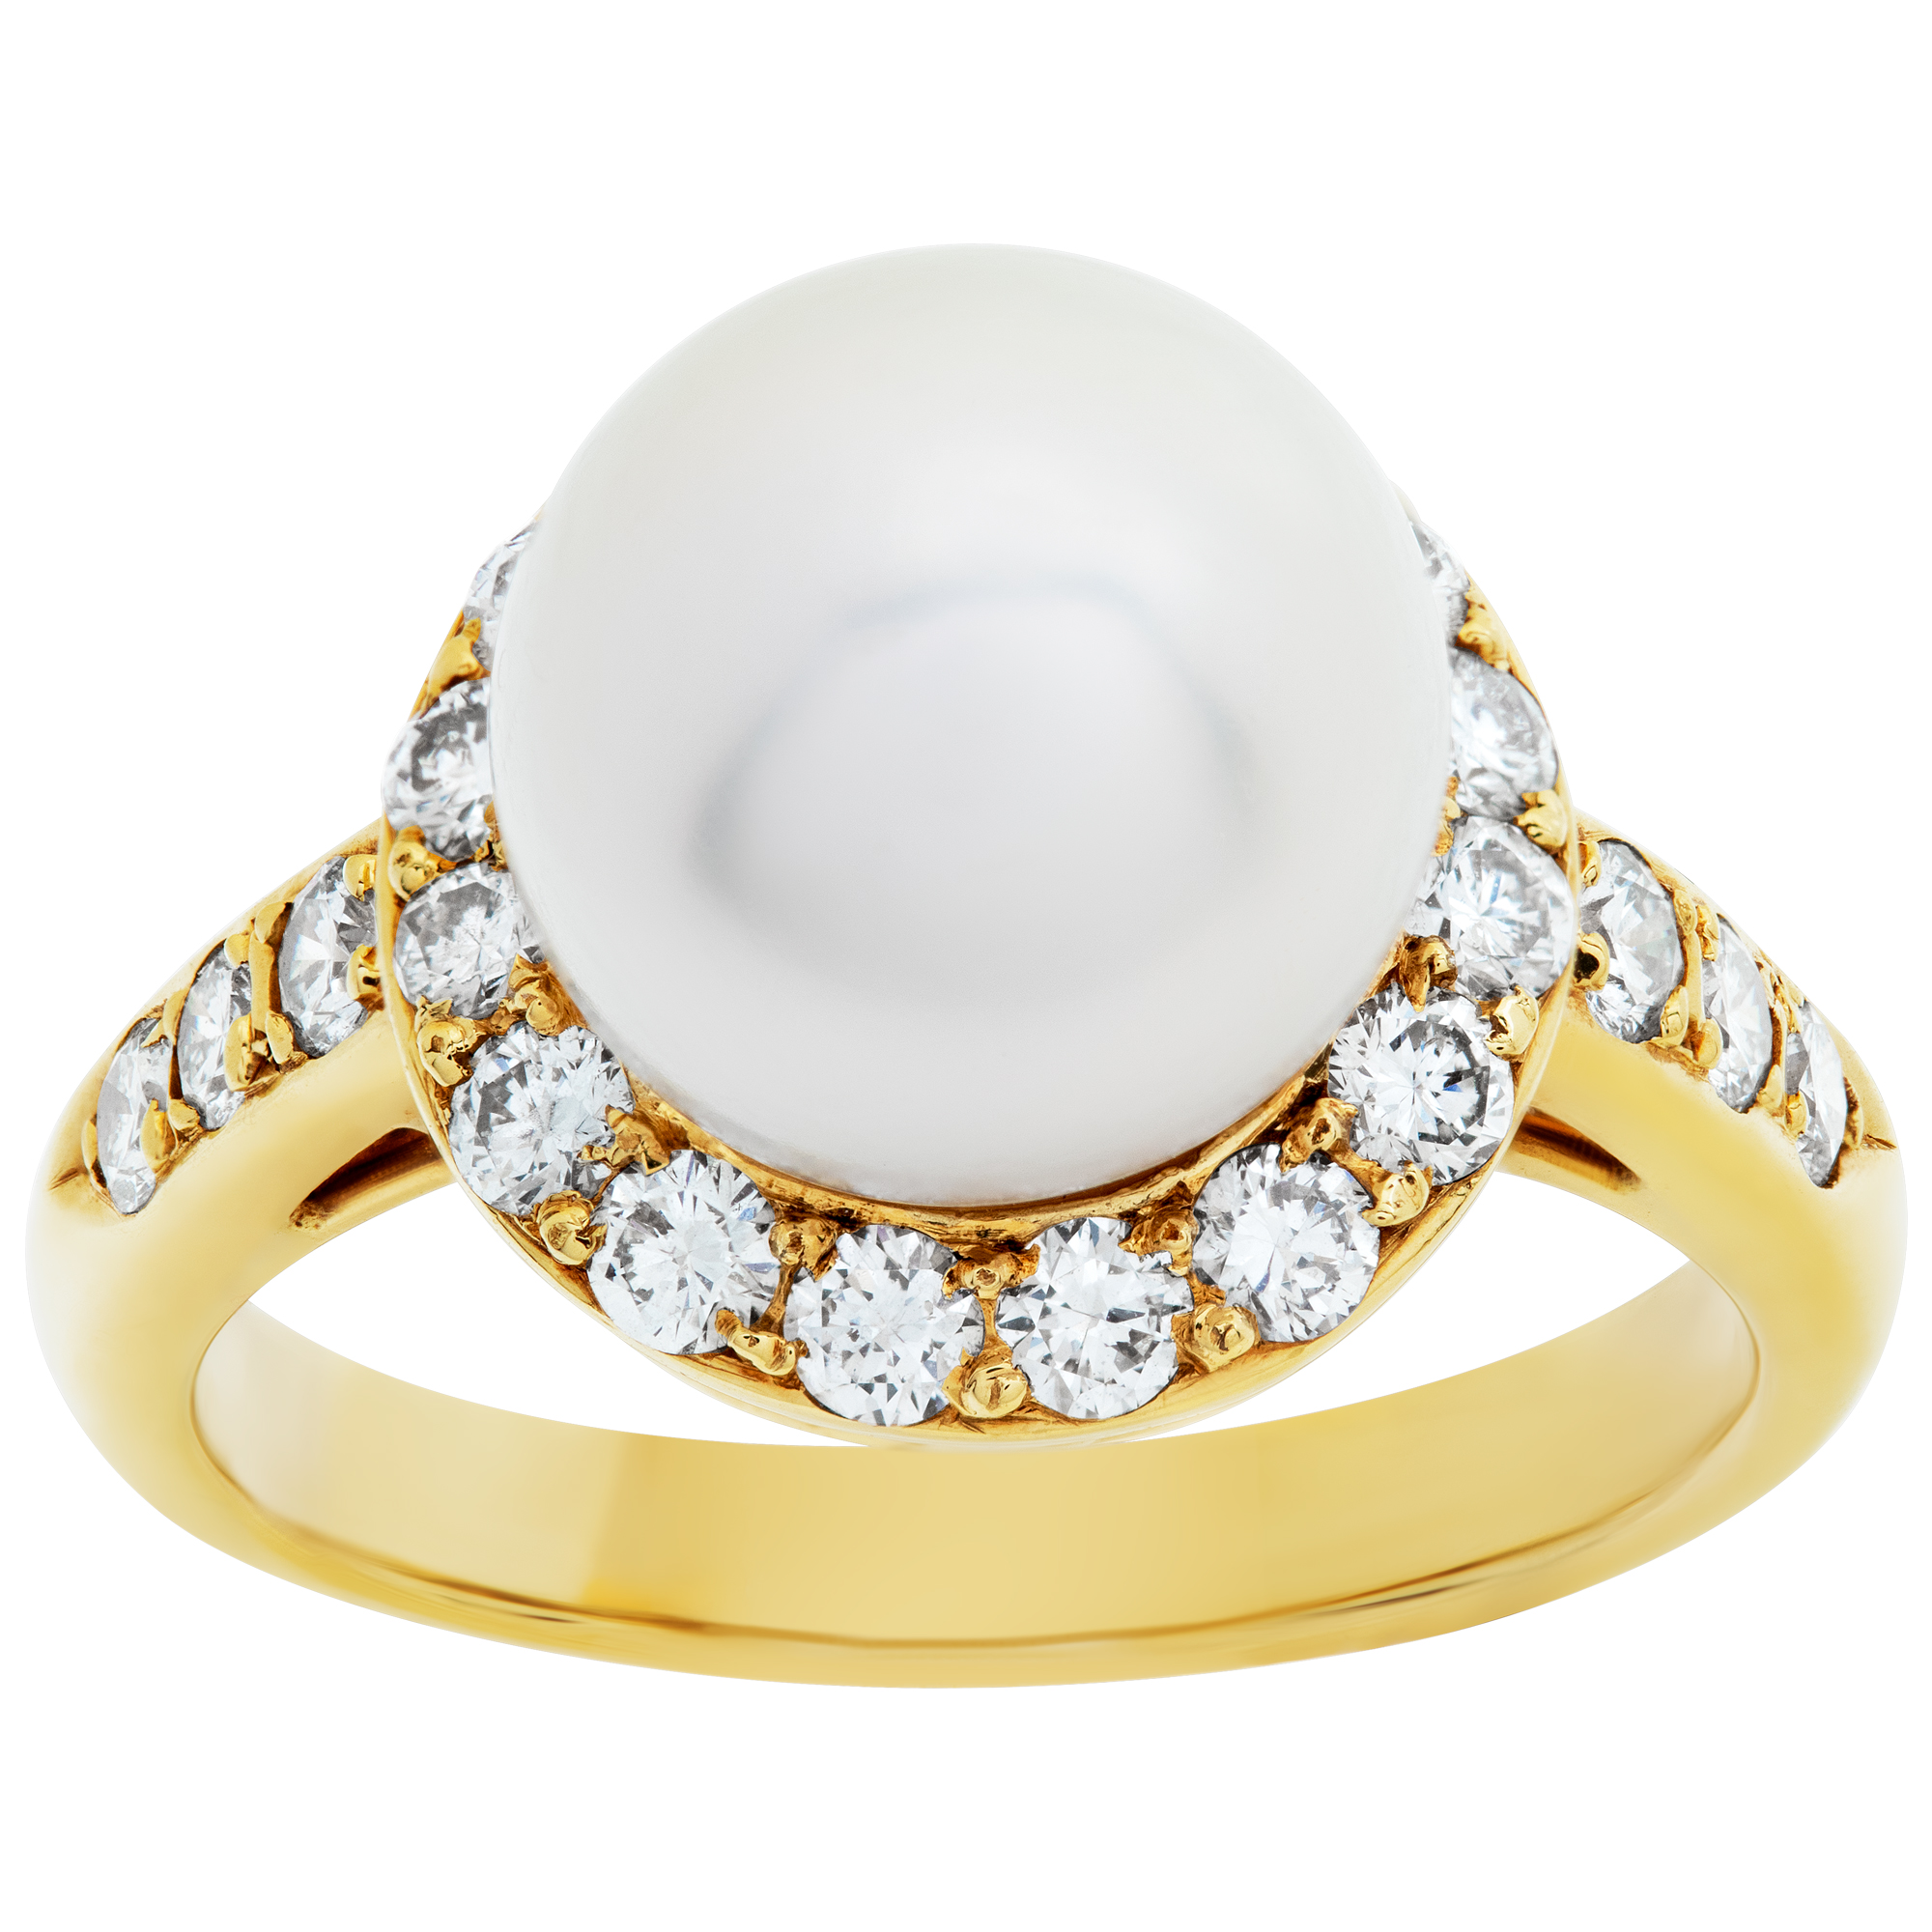 Pearl ring in 18k yellow gold with an approximate 1.30 carats in accent diamonds image 1